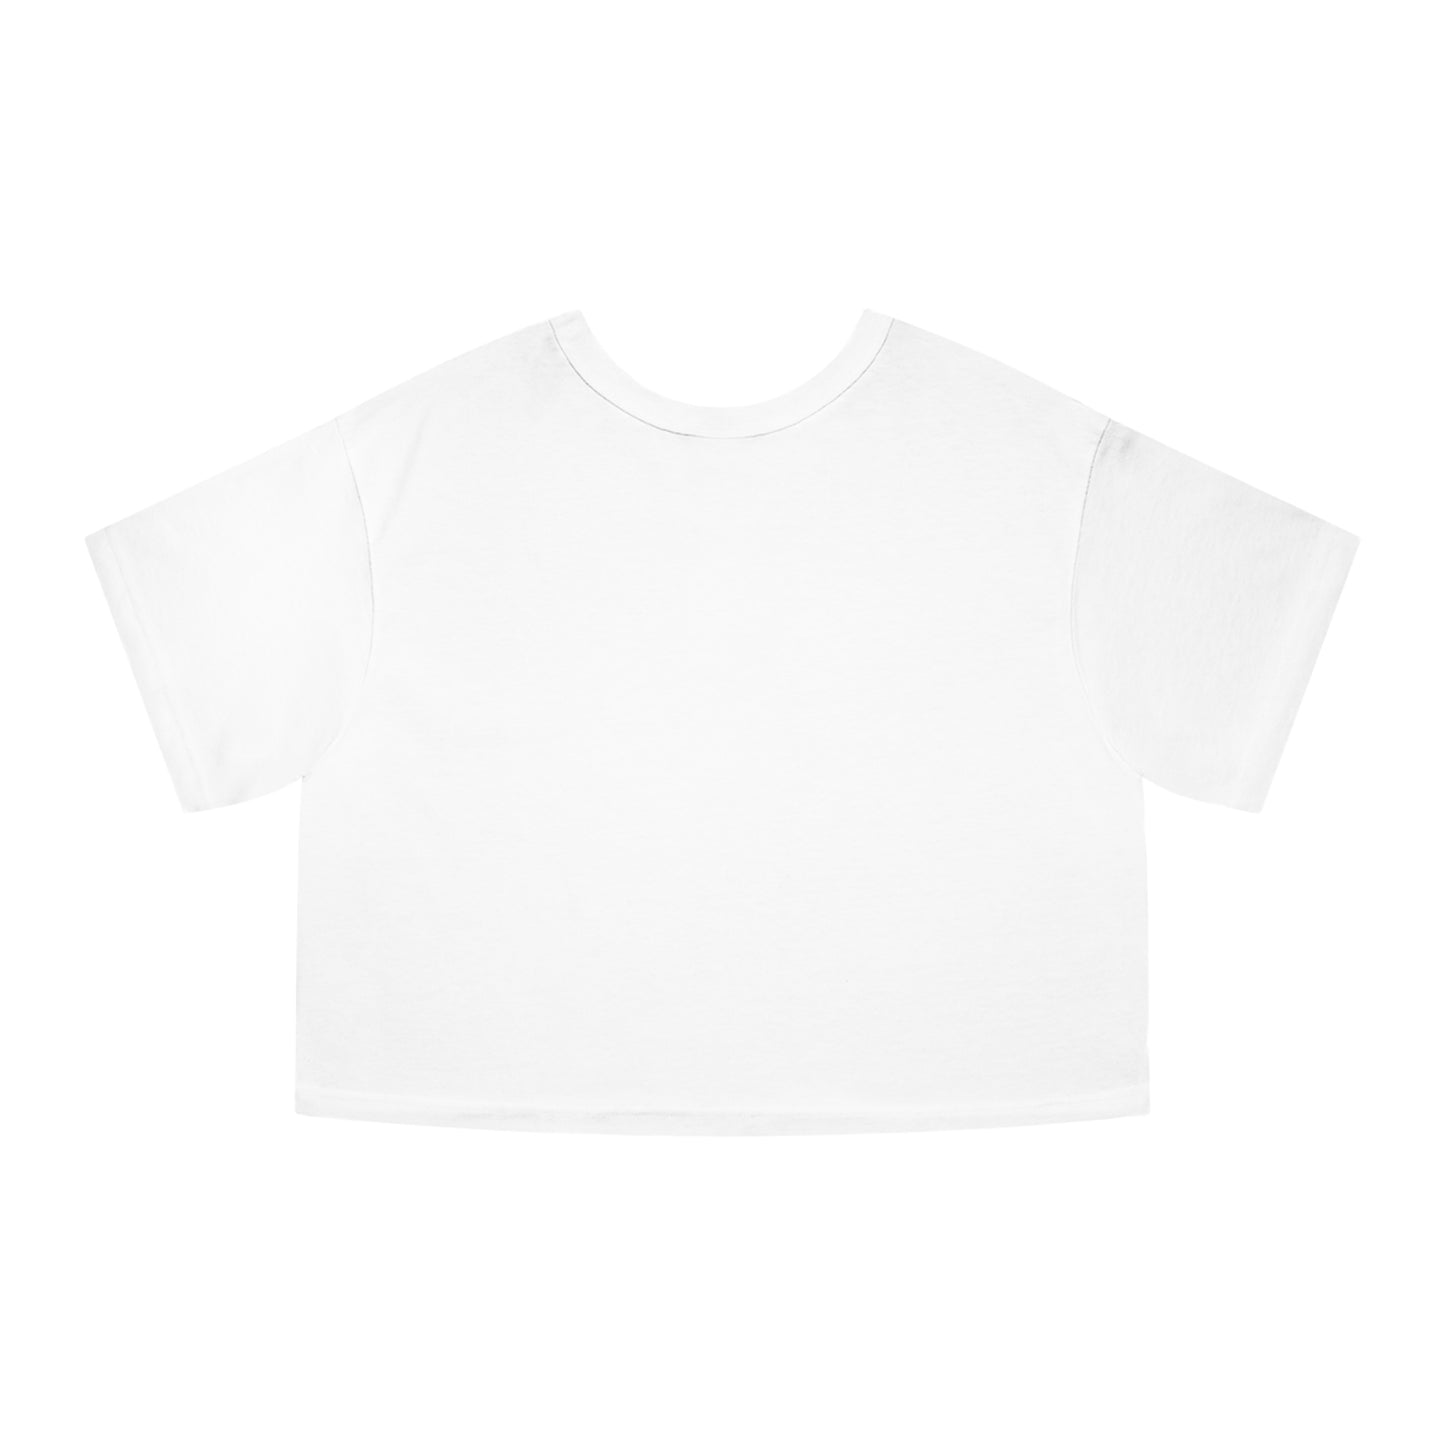 Twink 1 Cropped T-Shirt